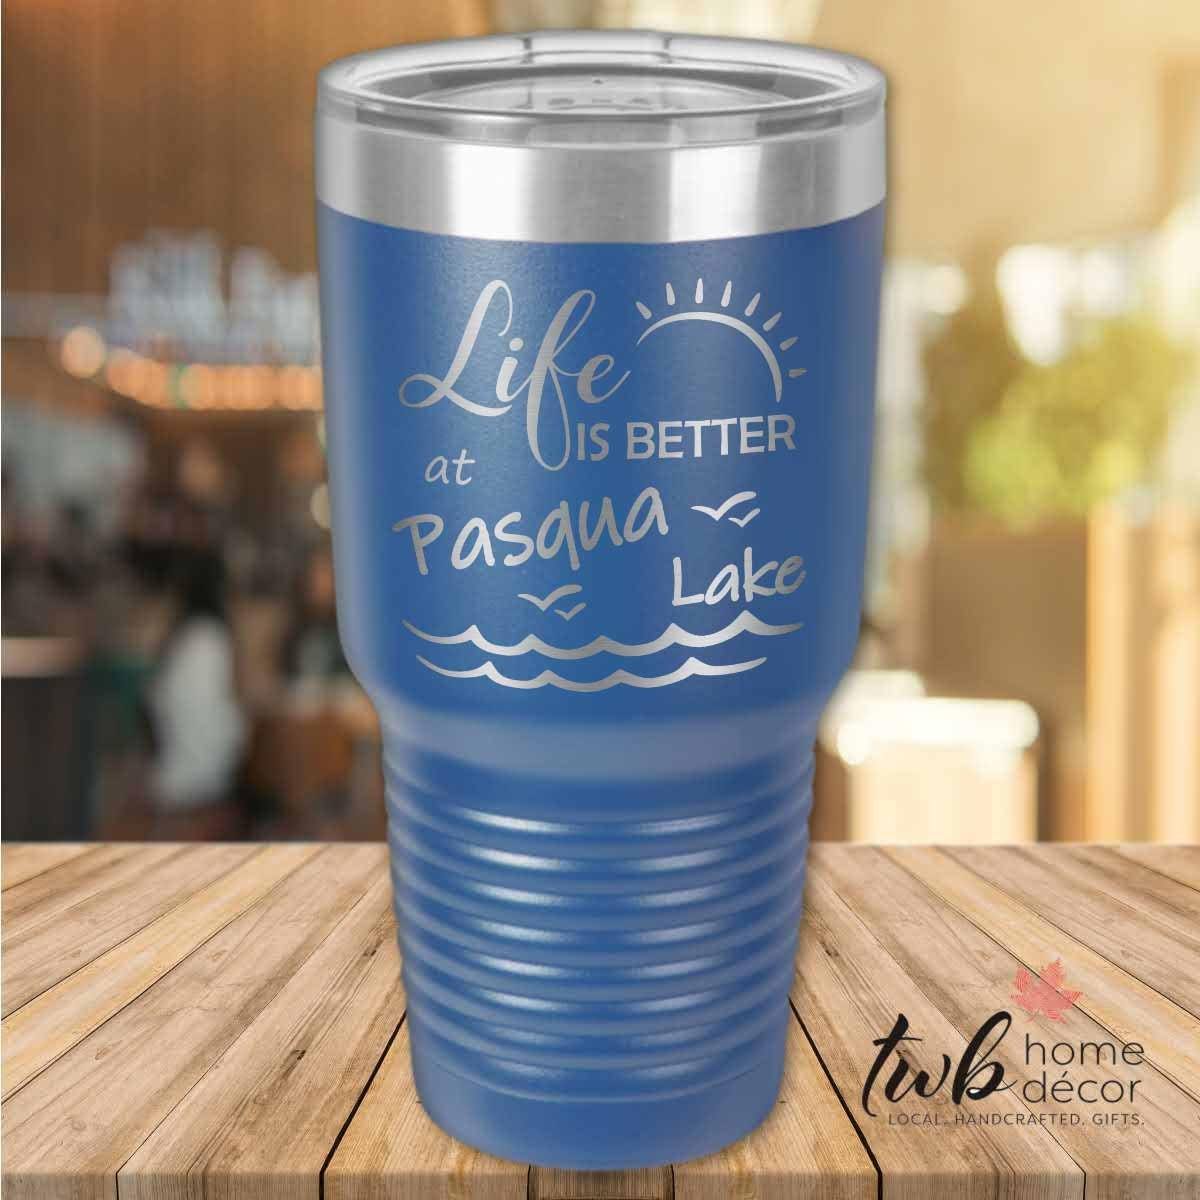 Life is Better at Pasqua Lake Thermal - TWB Home Decor